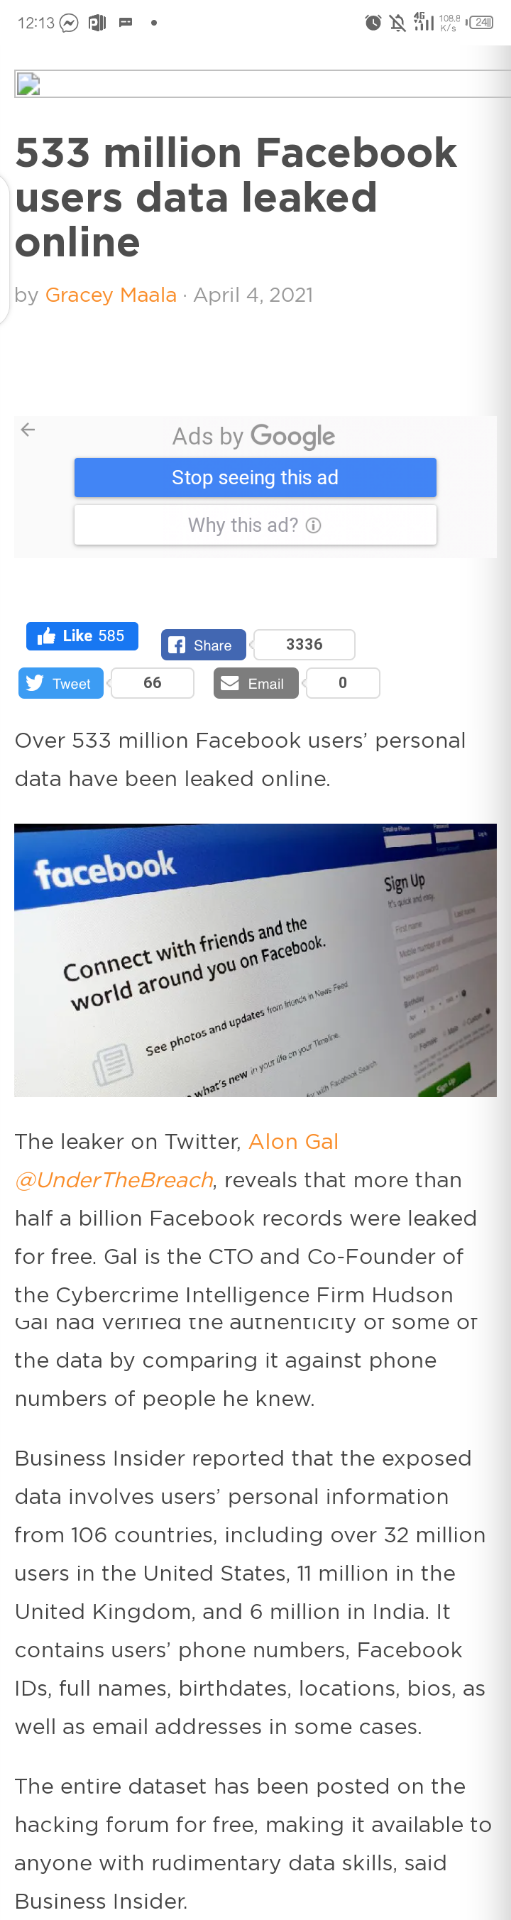 Scammers Expose Info of Over 150,000 Facebook Users Via Unsecured Database  - Spiceworks